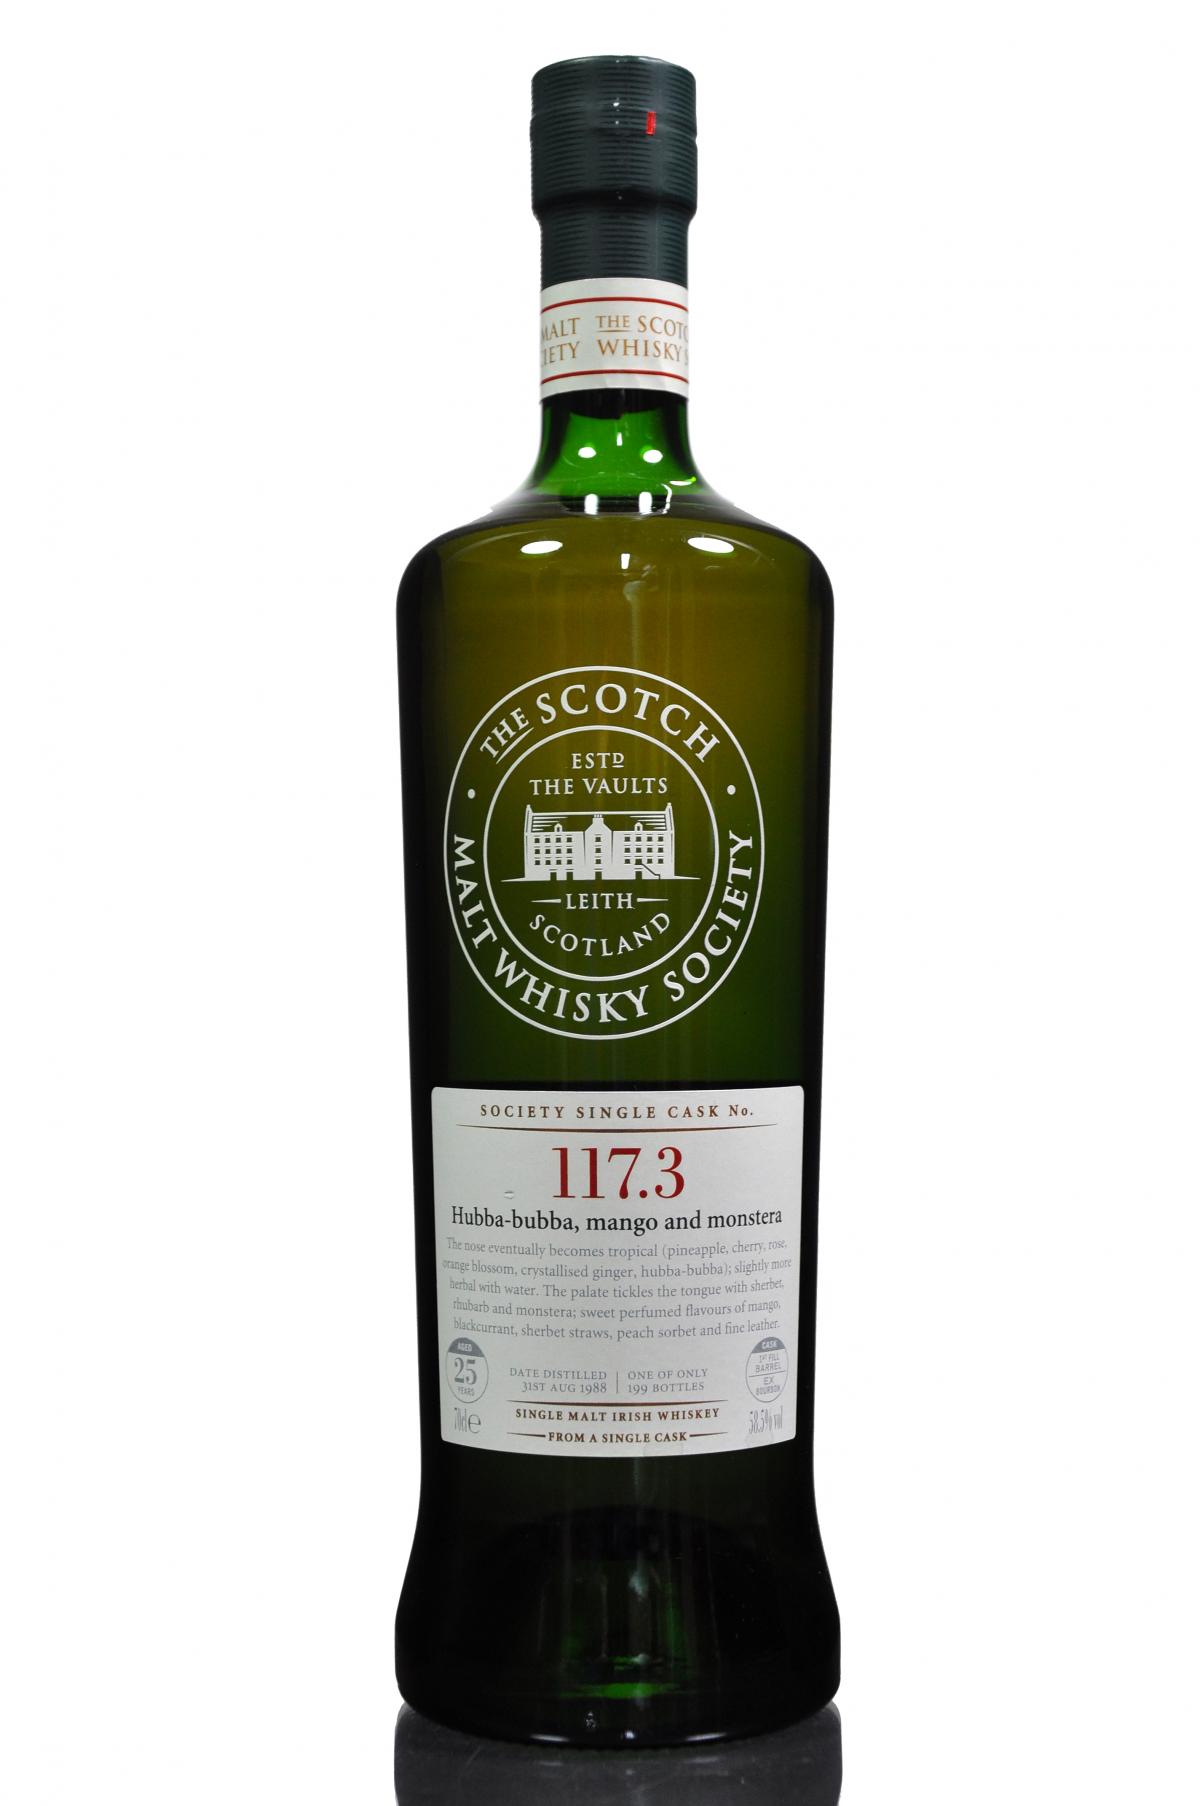 Cooley 1988 - 25 Year Old - SMWS 117.3